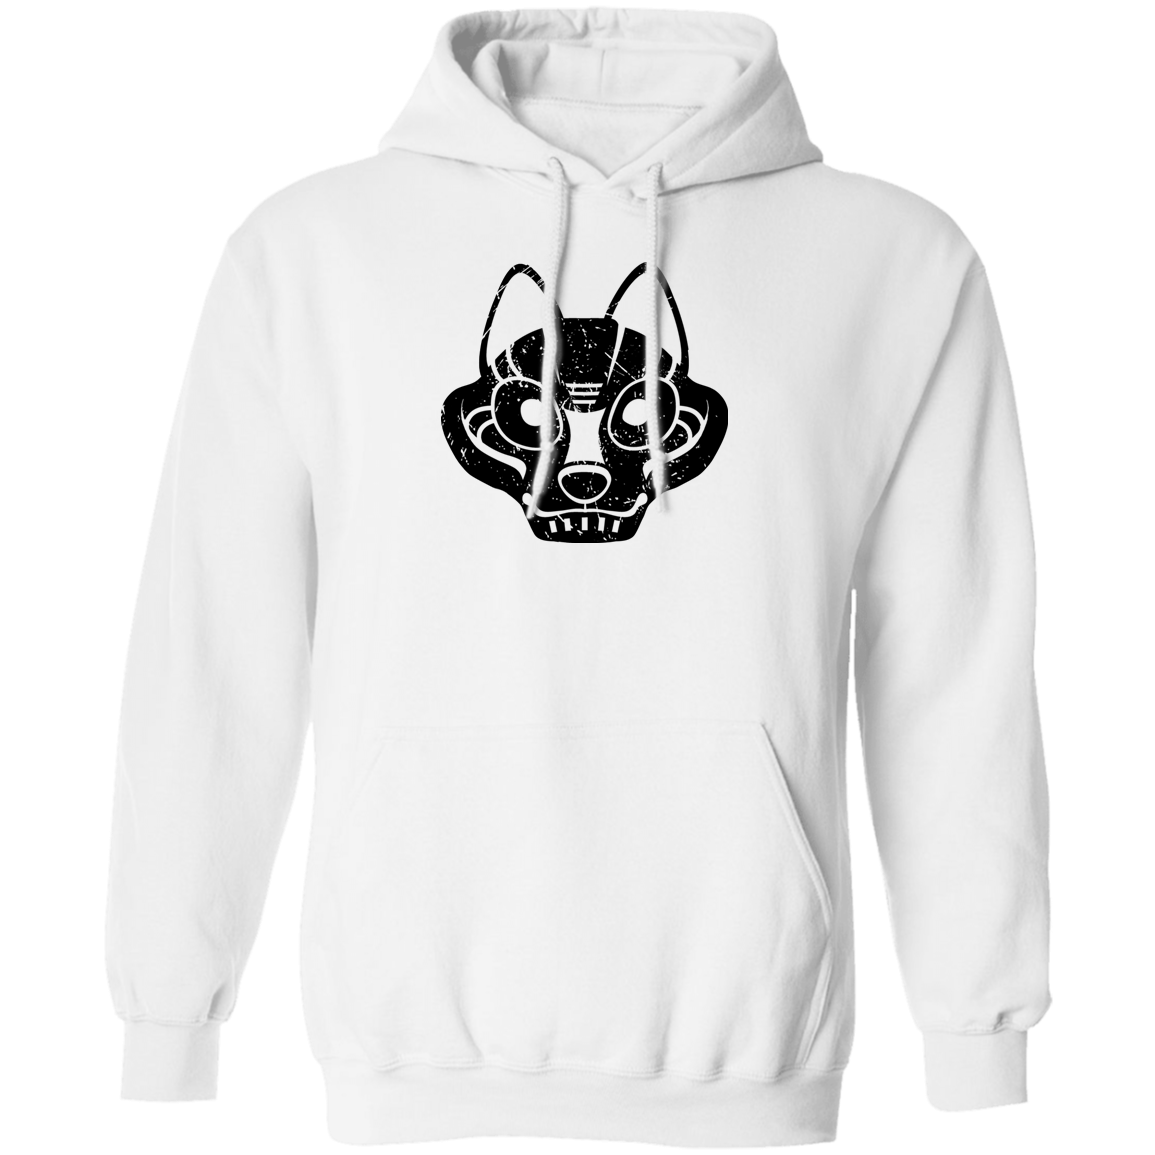 Black Distressed Emblem Hoodies for Adults (Wolf/Wolf Squad)